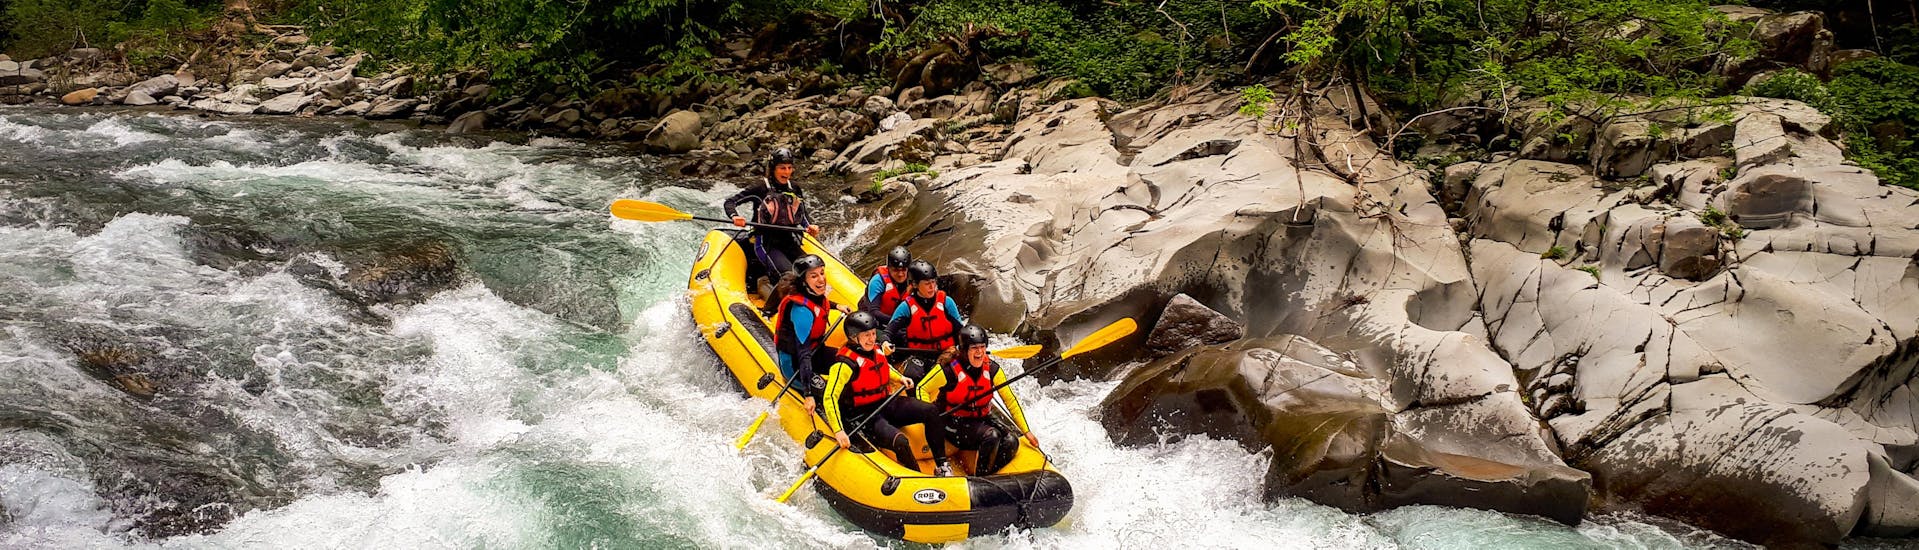 Our experienced guide gives tips to the participants on how to deal with whitewater during the classic Rafting on the Lima river with Garfagnana Rafting.